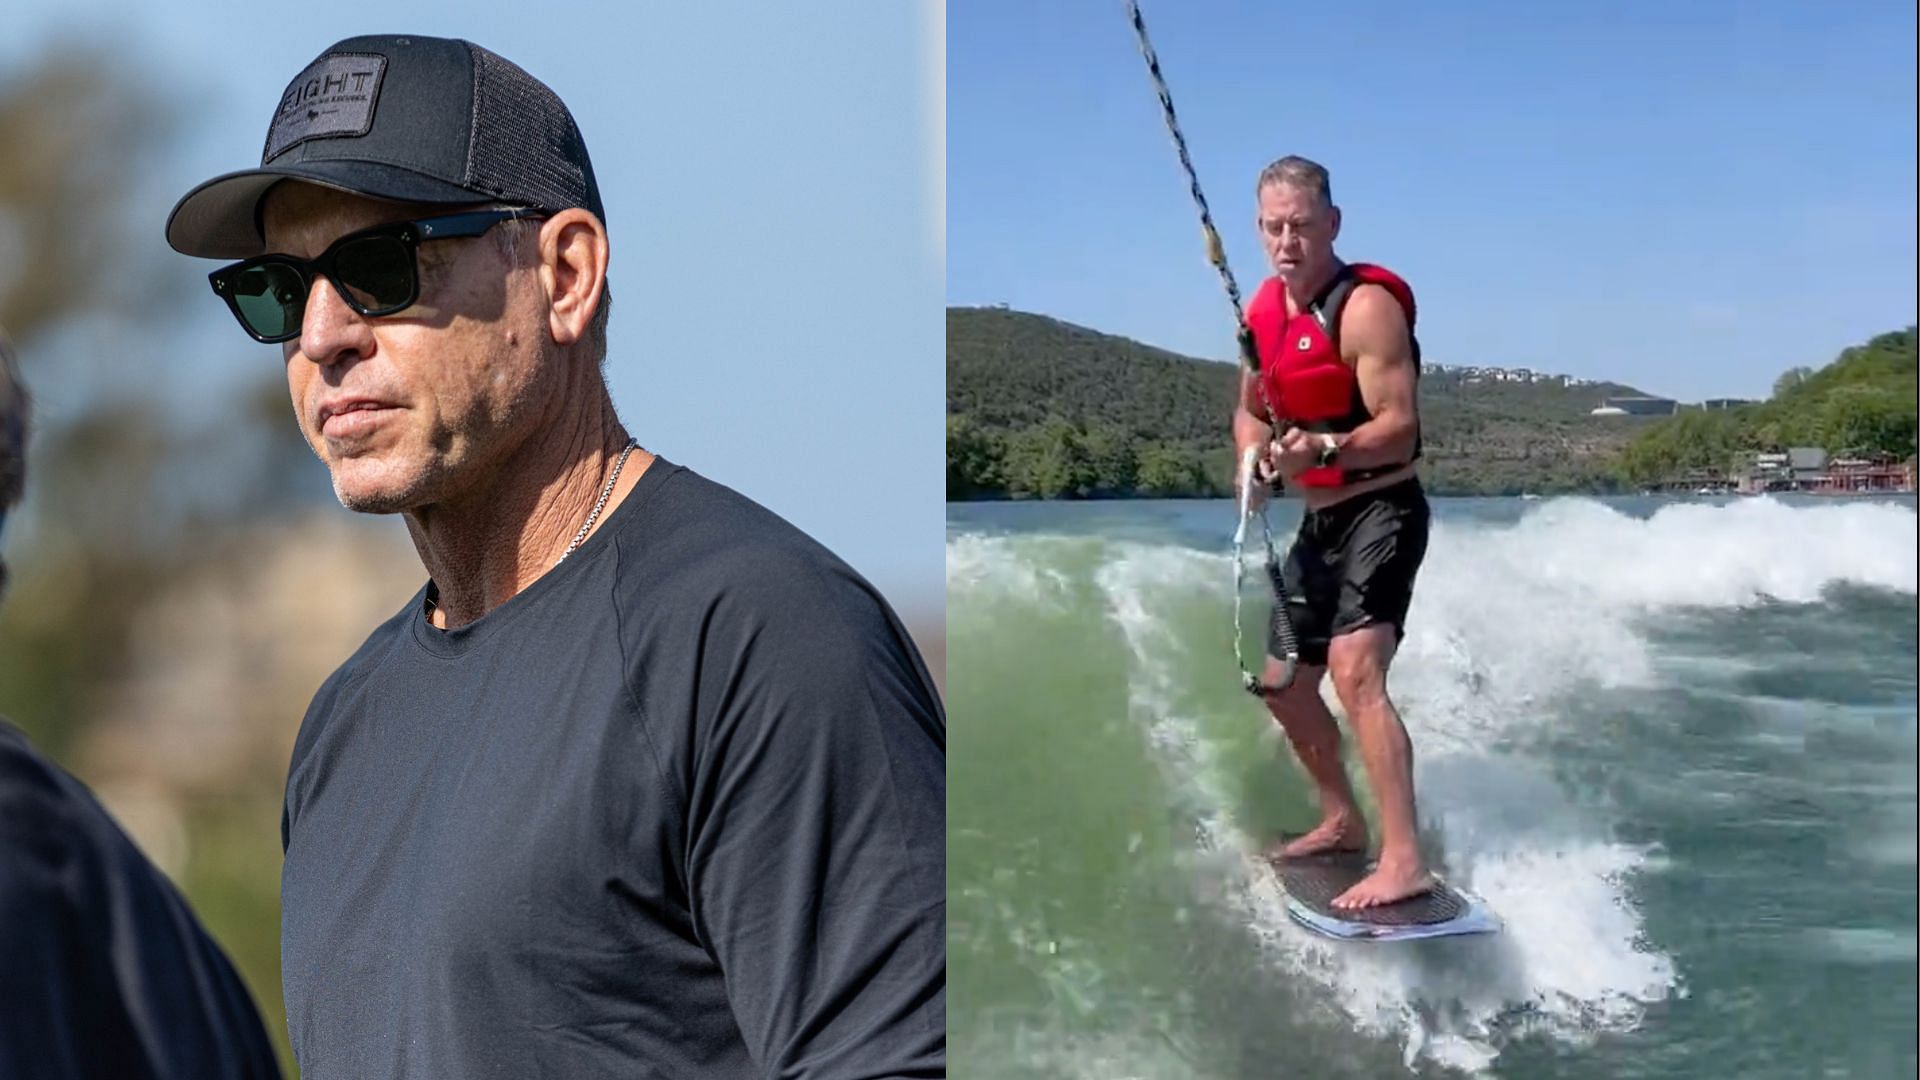 WATCH: Cowboys legend Troy Aikman goes wake surfing after reportedly finalizing divorce